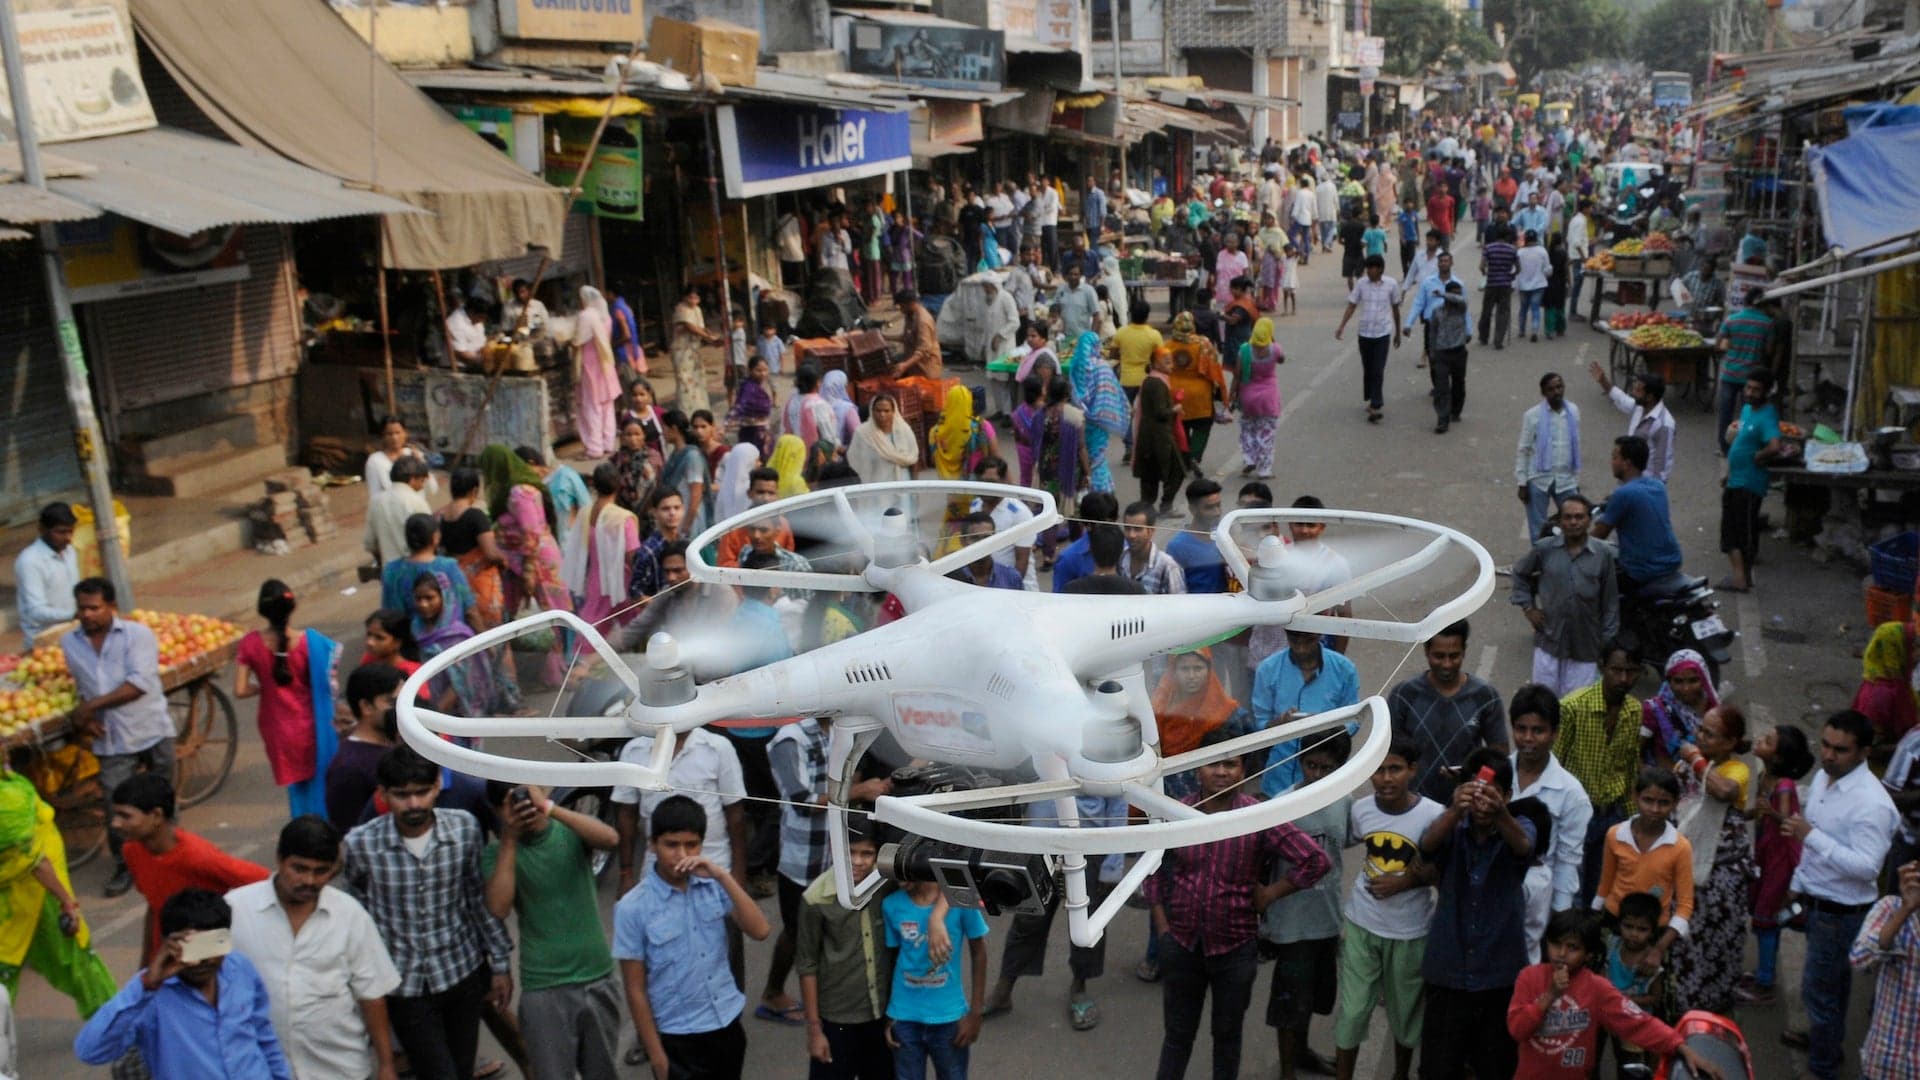 Indian Researchers and University Students Develop a First-Aid, Rapid Response Drone